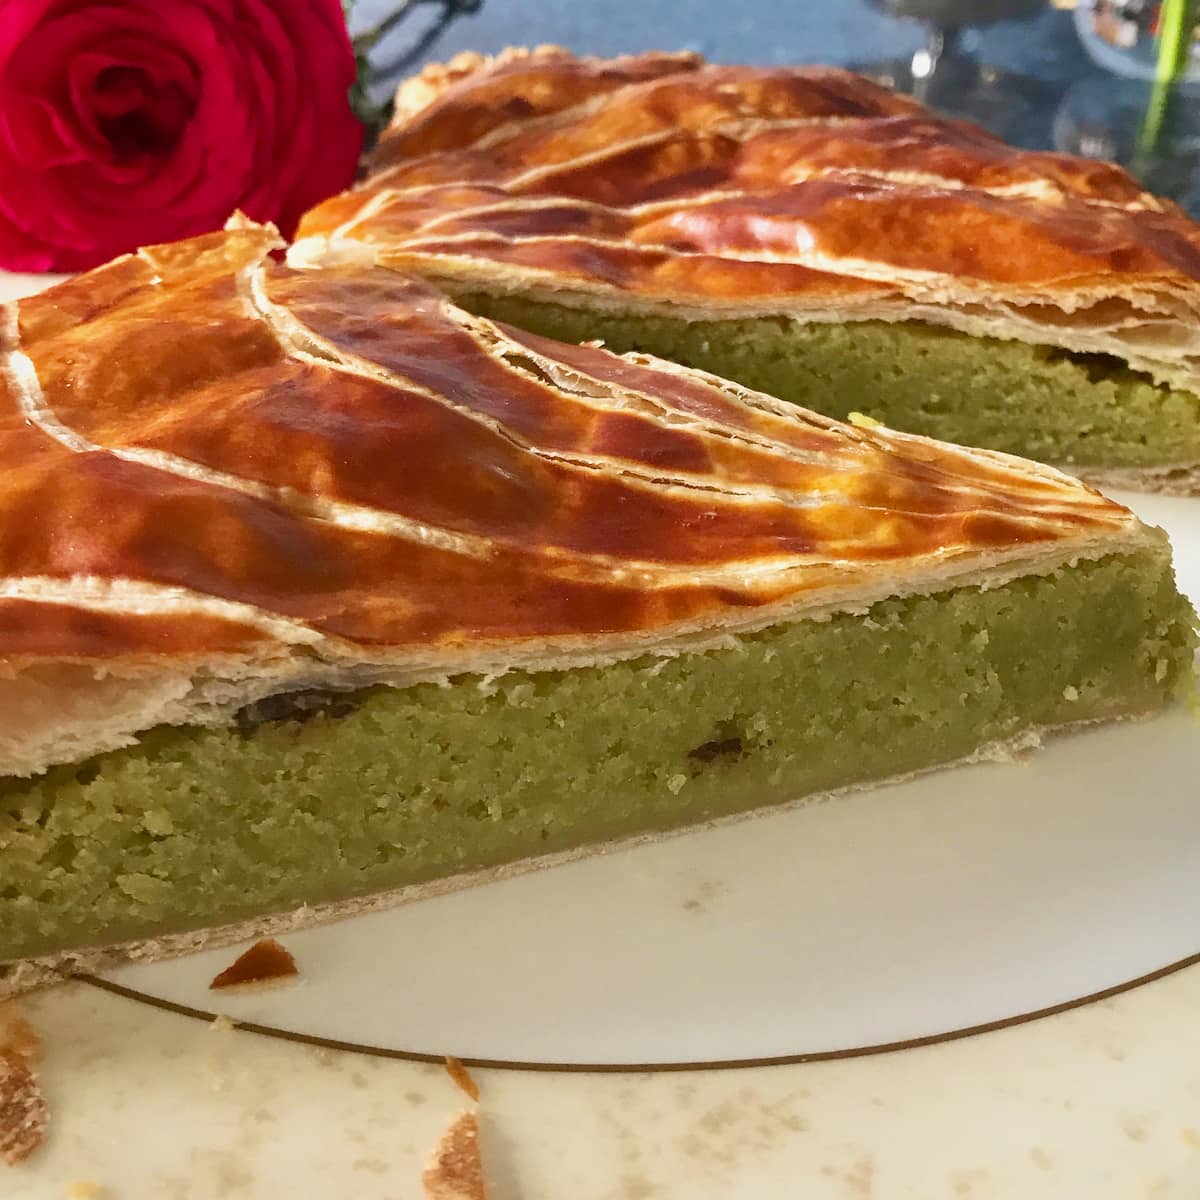 slice of galette des rois filled with pistachio and chocolate 